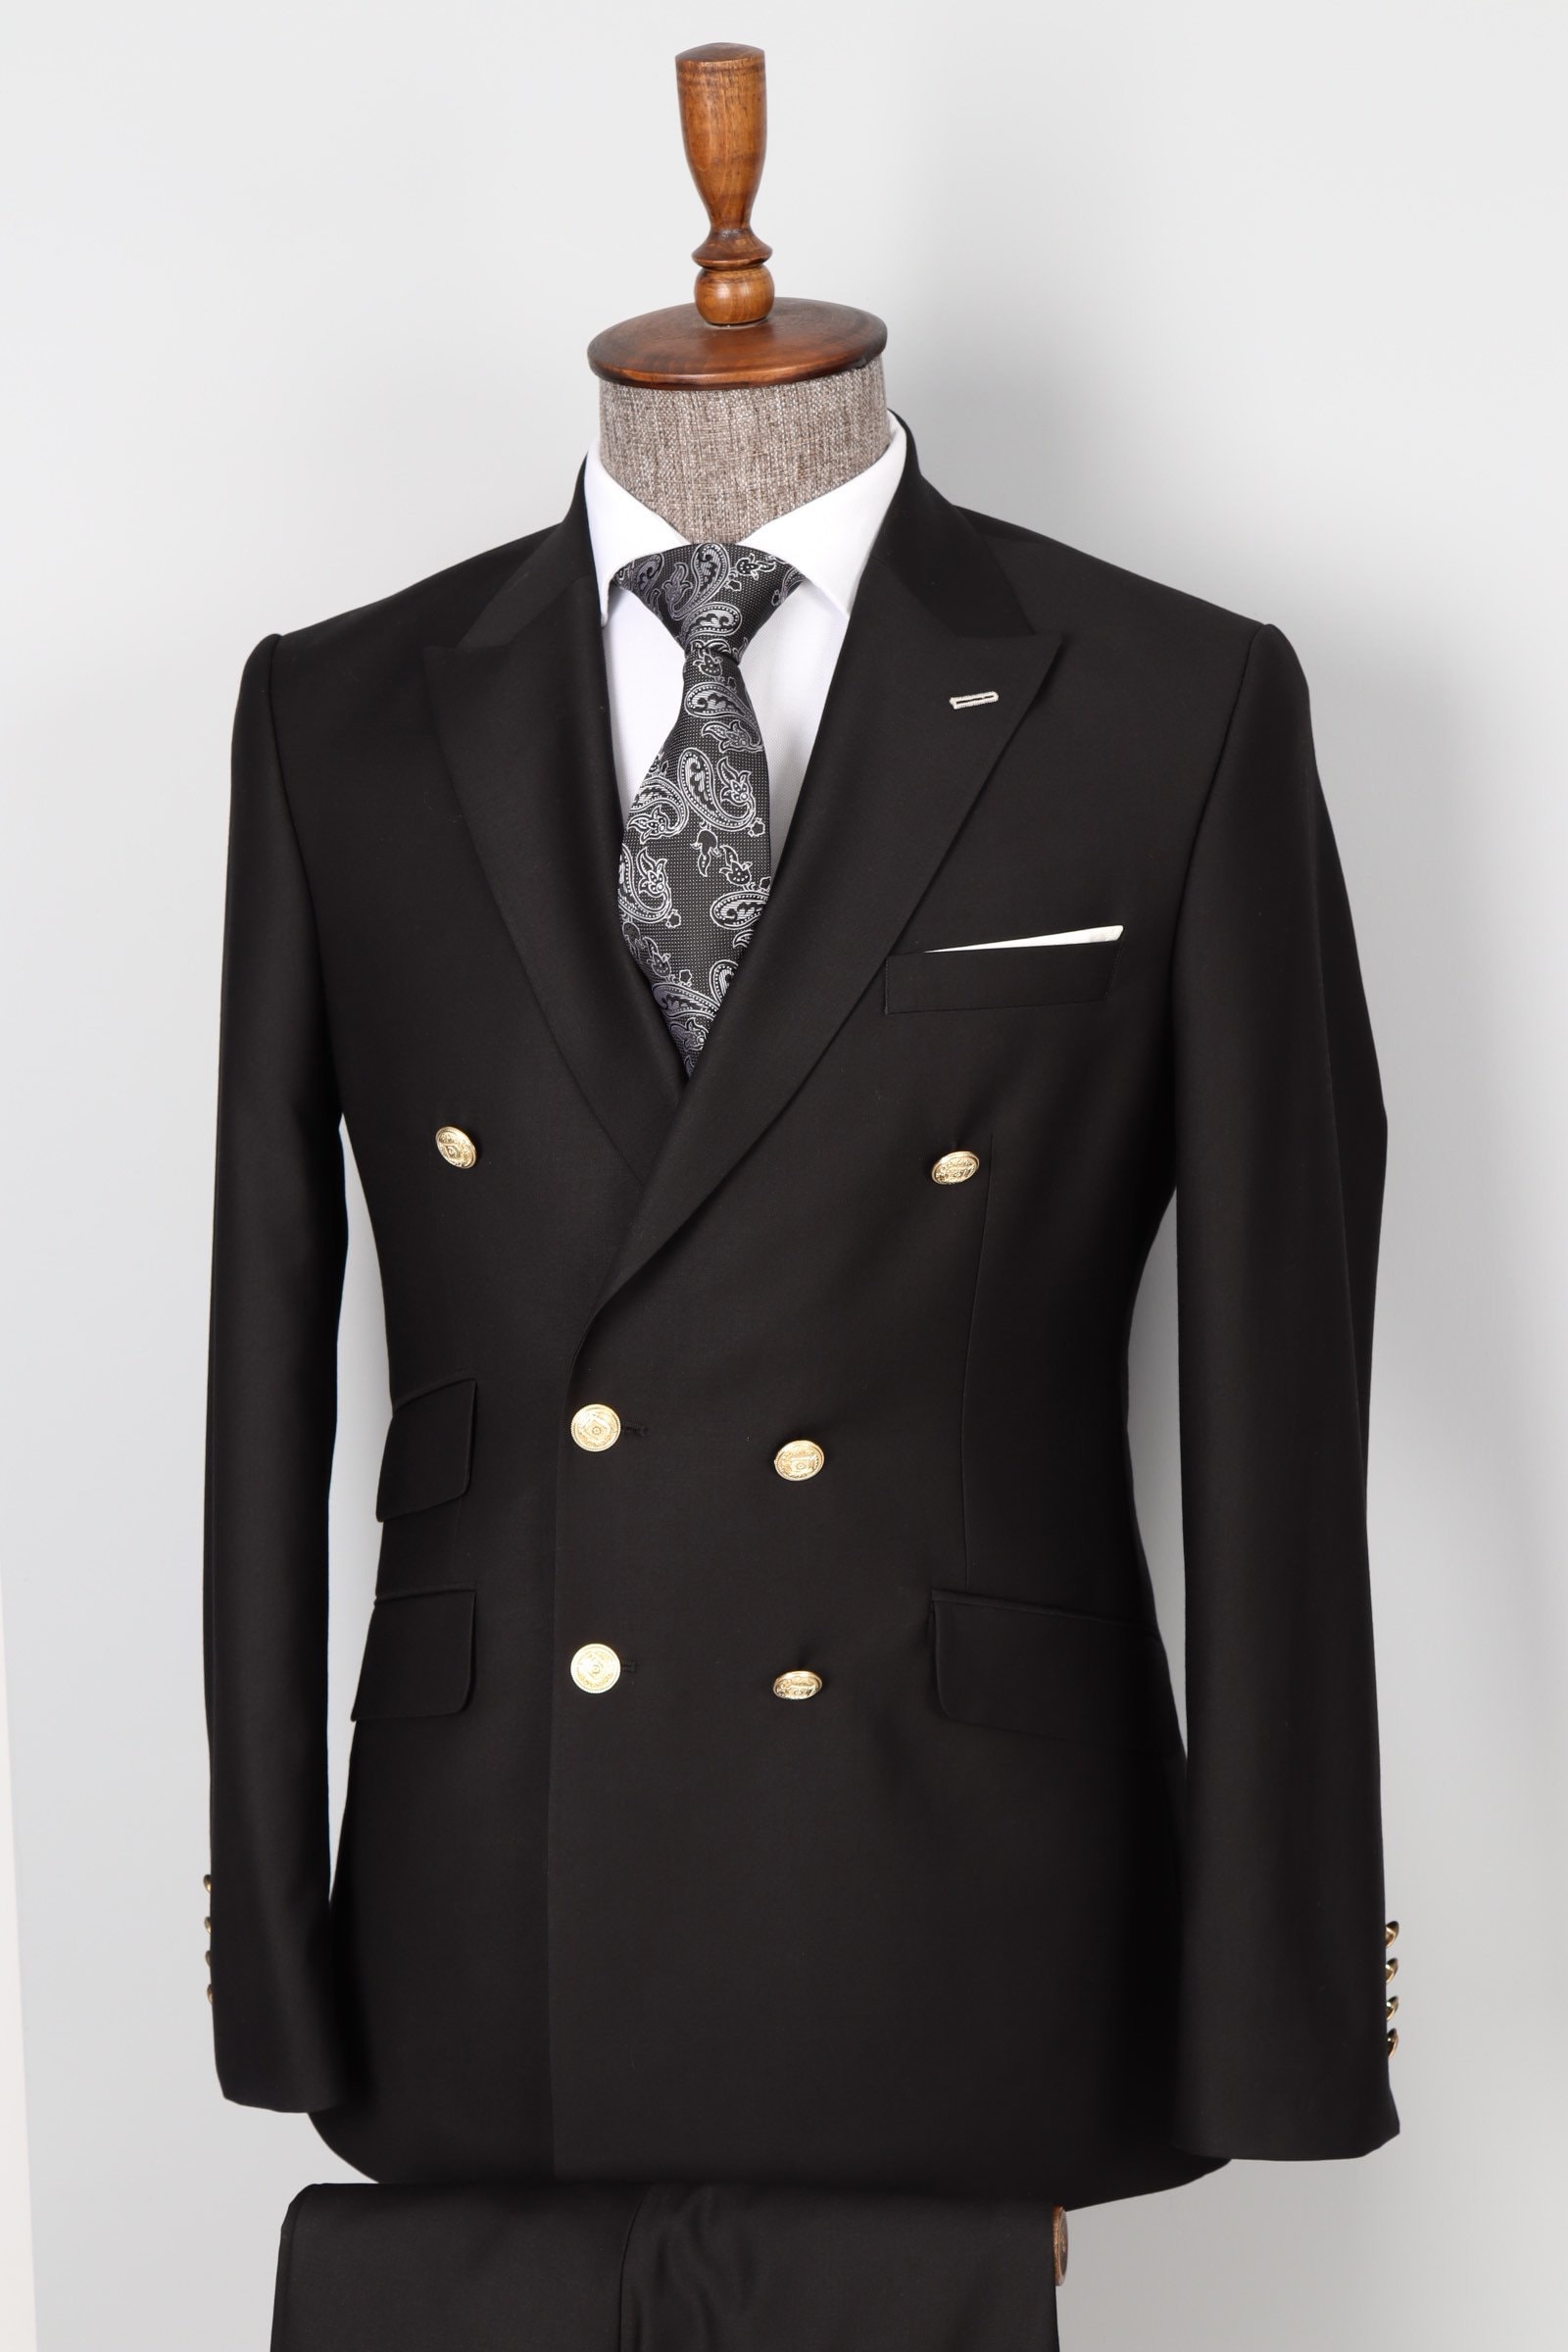 Double Breasted Classic Black Blazer Slim Fit Jacket With Gold Buttons